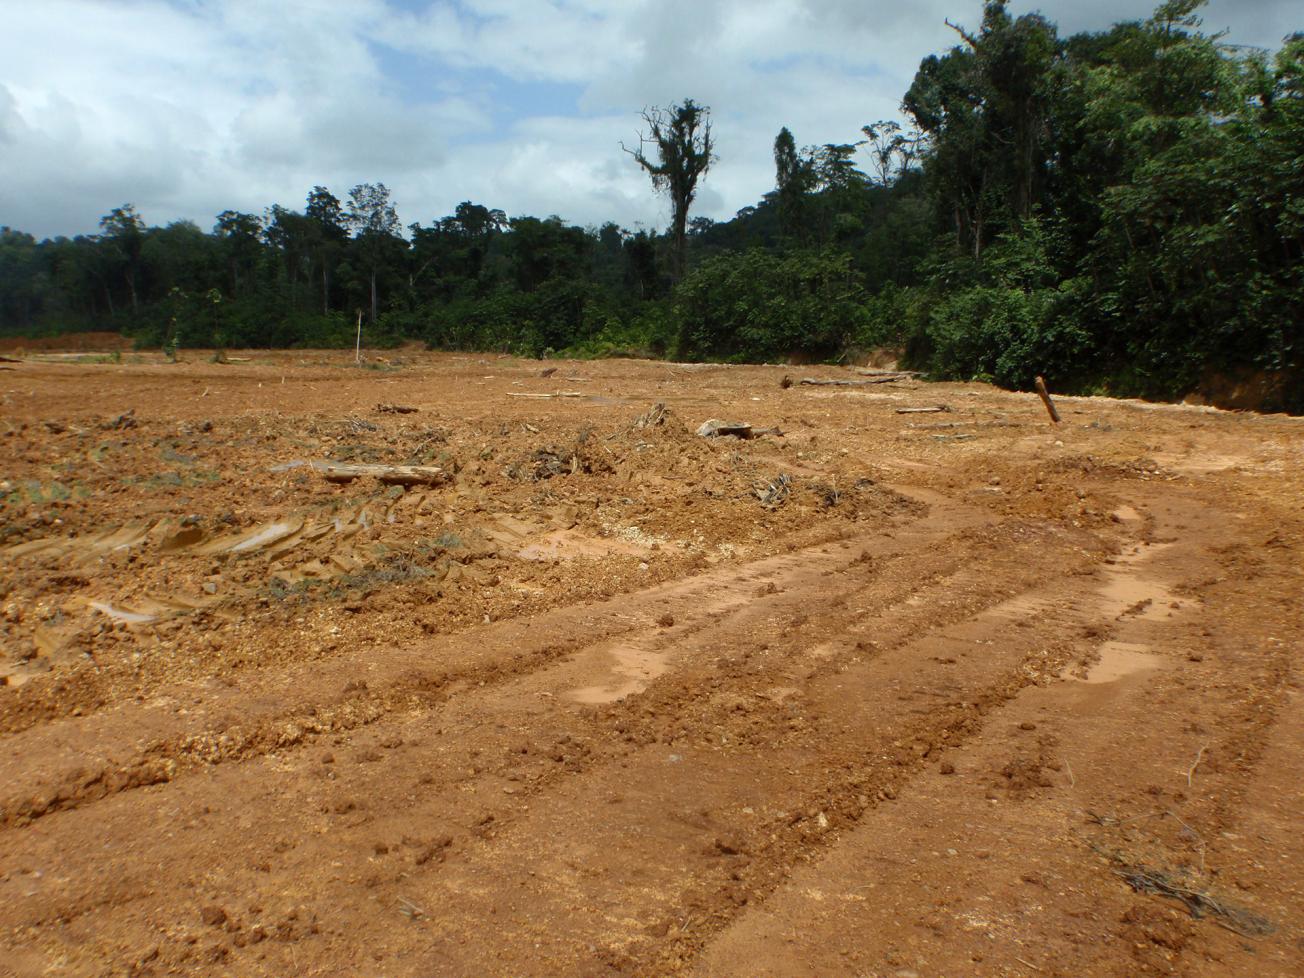 Mining area after soil remediation in French Guiana 